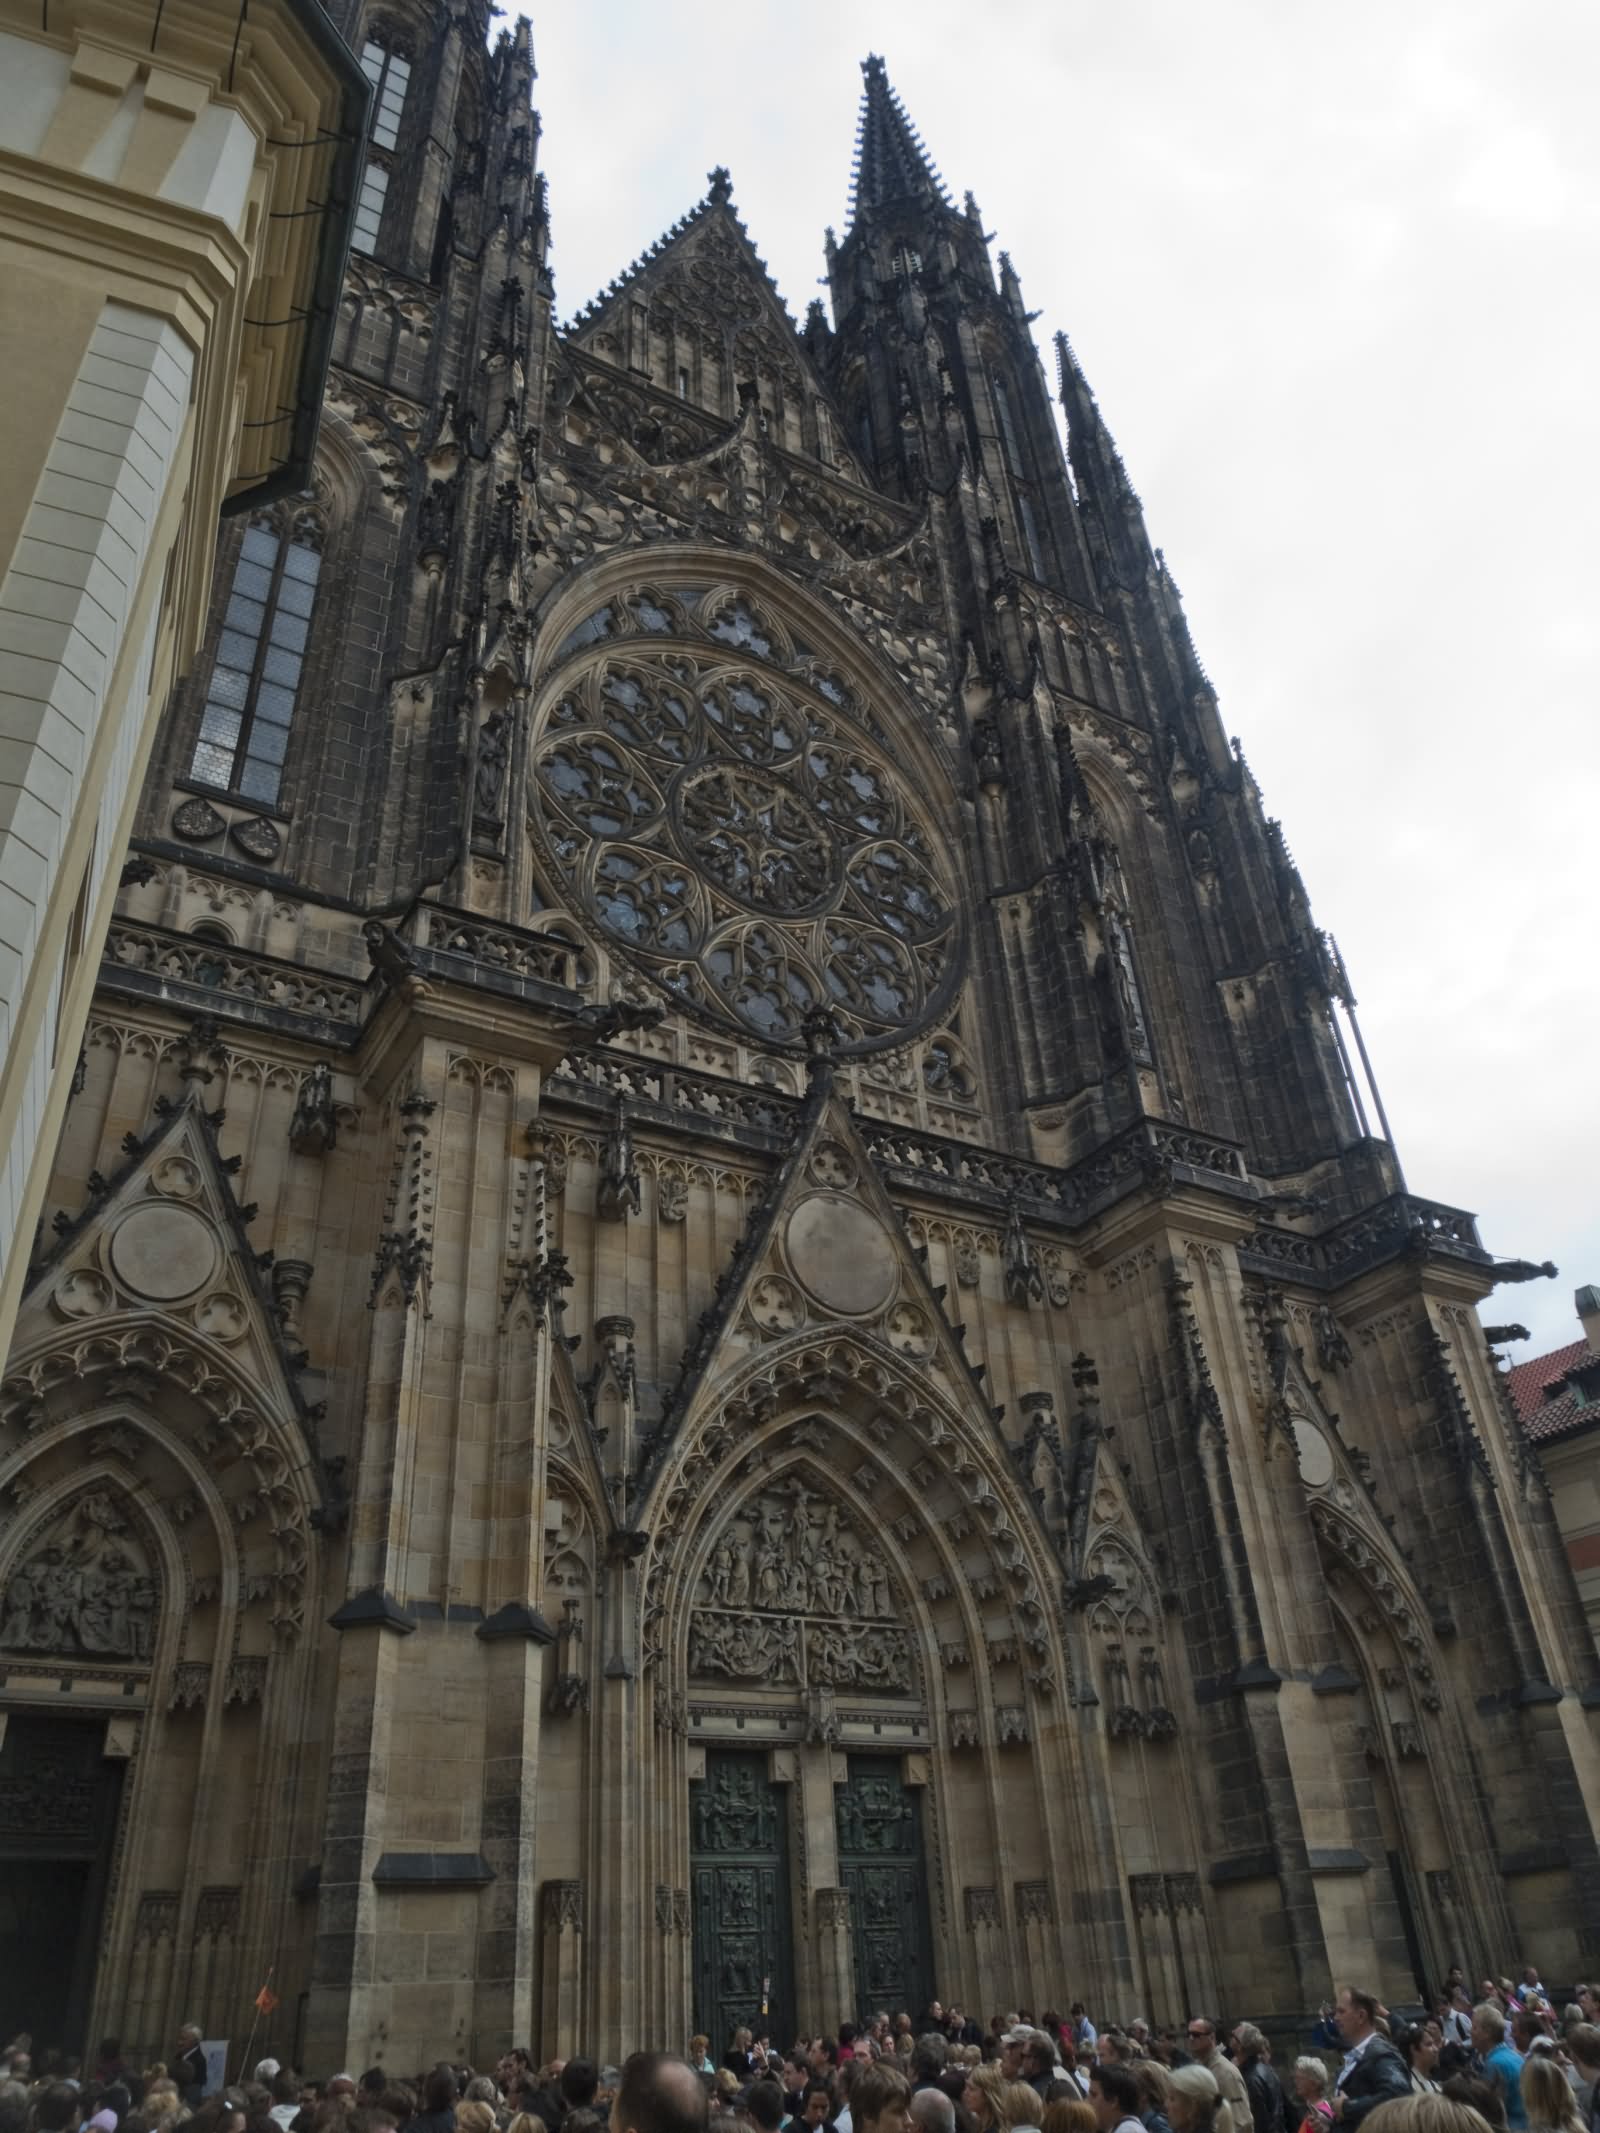 Beautiful Architecture Work On The St. Vitus Cathedral, Prague